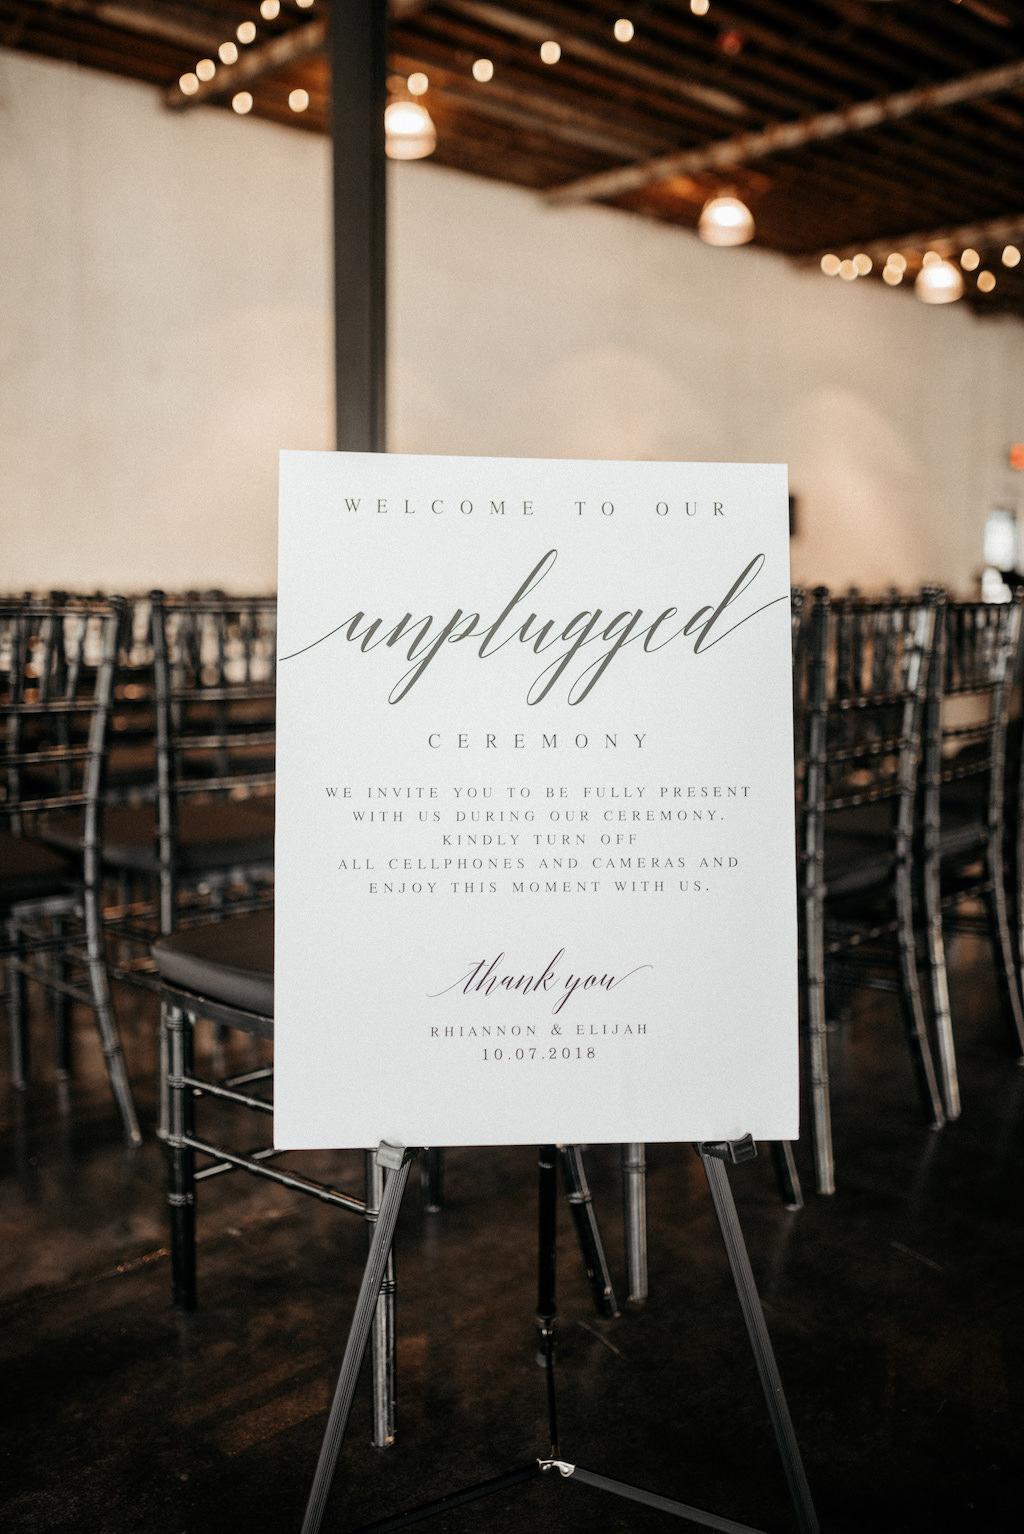 Classic White and Black Wedding Welcome Unplugged Ceremony Sign